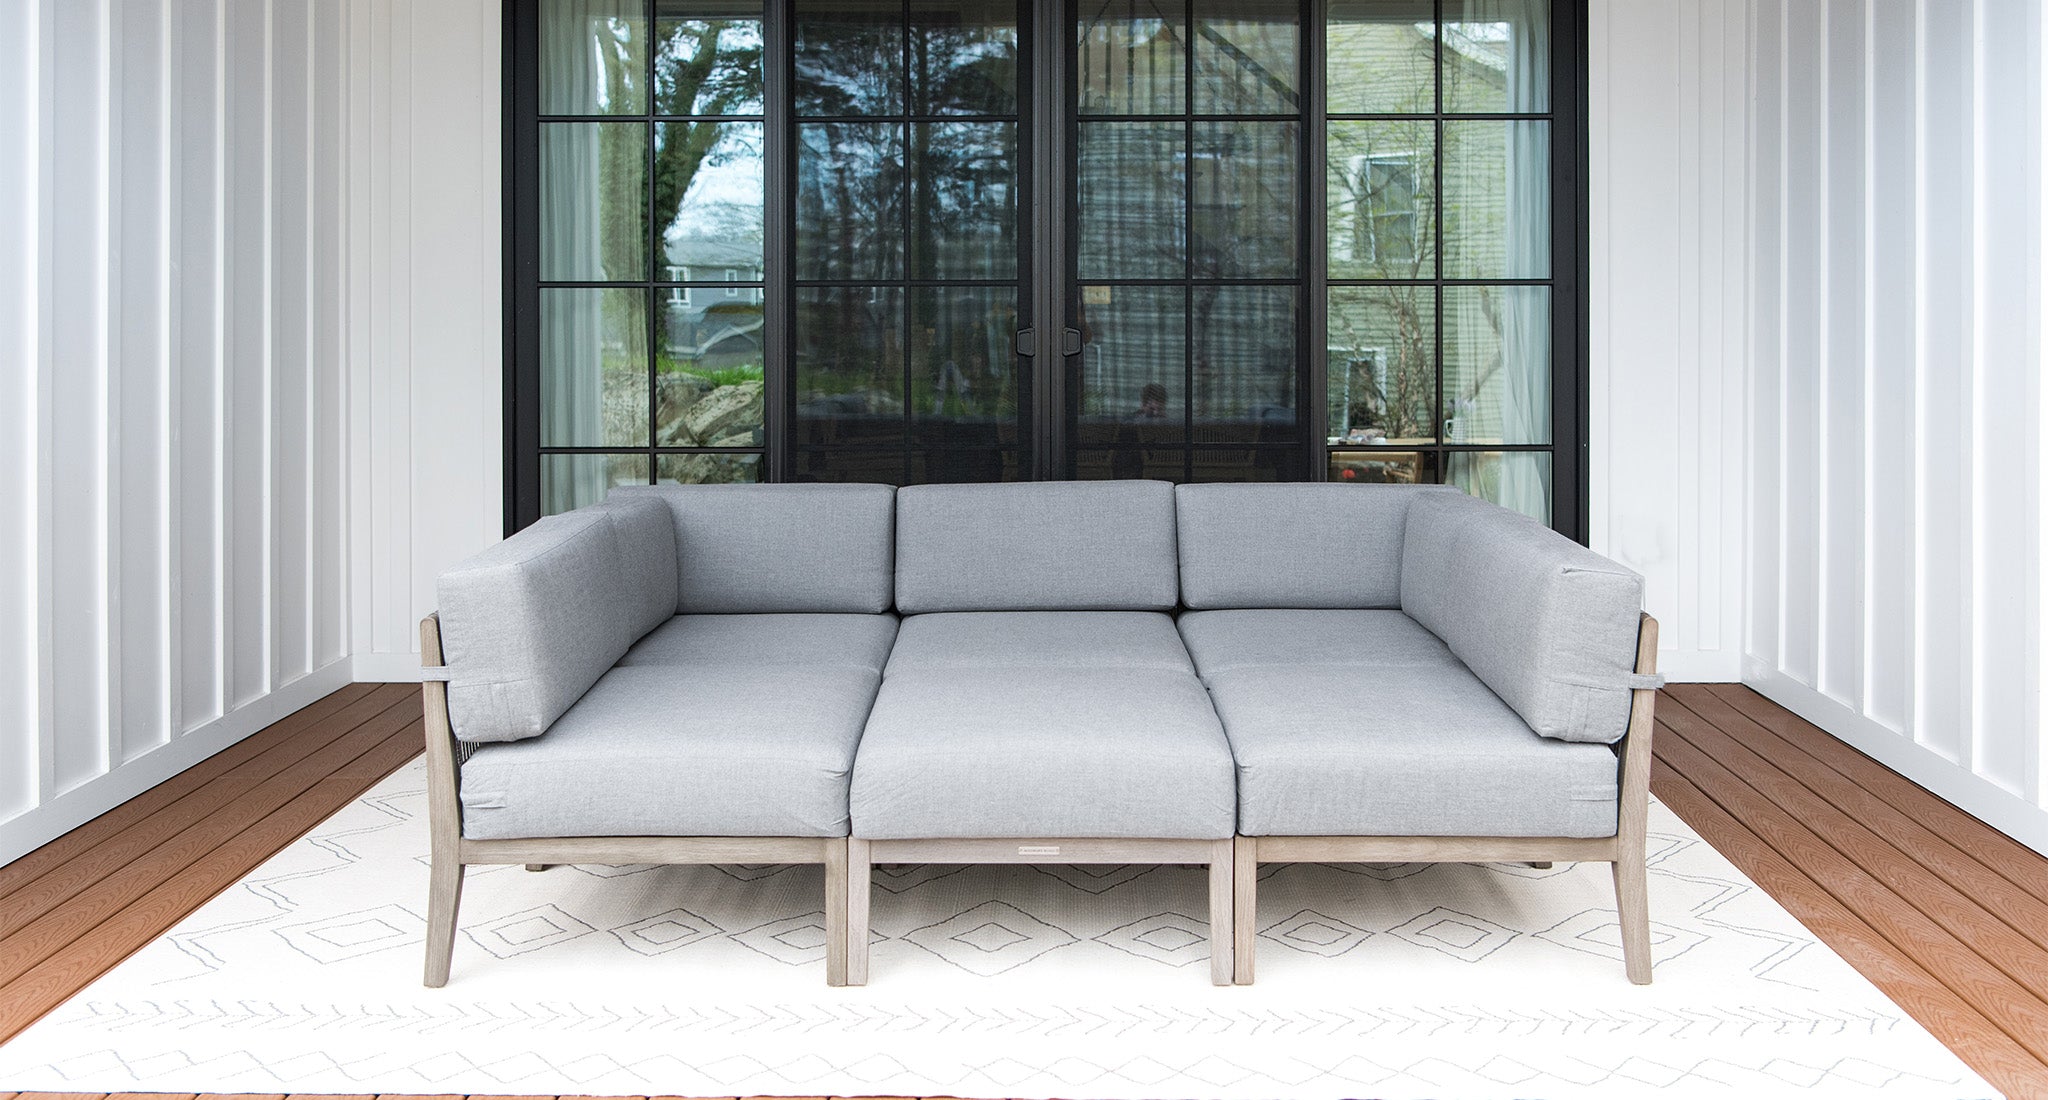 Capri Outdoor Daybed